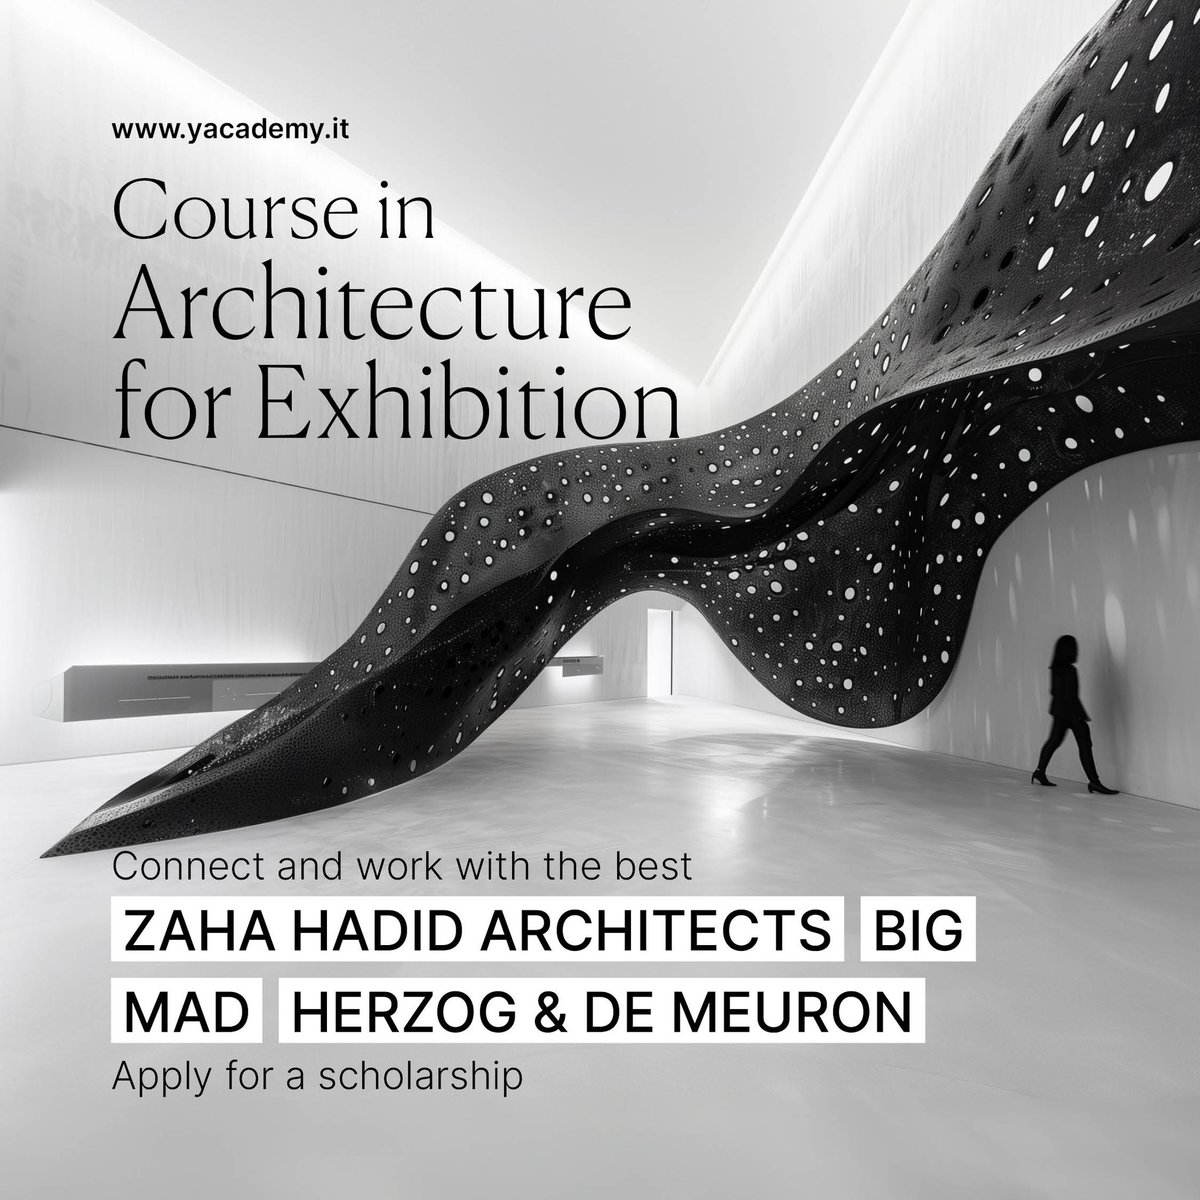 Would you like to design museums, galleries, and cultural spaces? 👉🏻Join the Architecture for Exhibition course at YACademy and get access to: - Special Lectures by the great masters - Hands-on workshops - Internships with world-renowned firms Visit the website and take your…